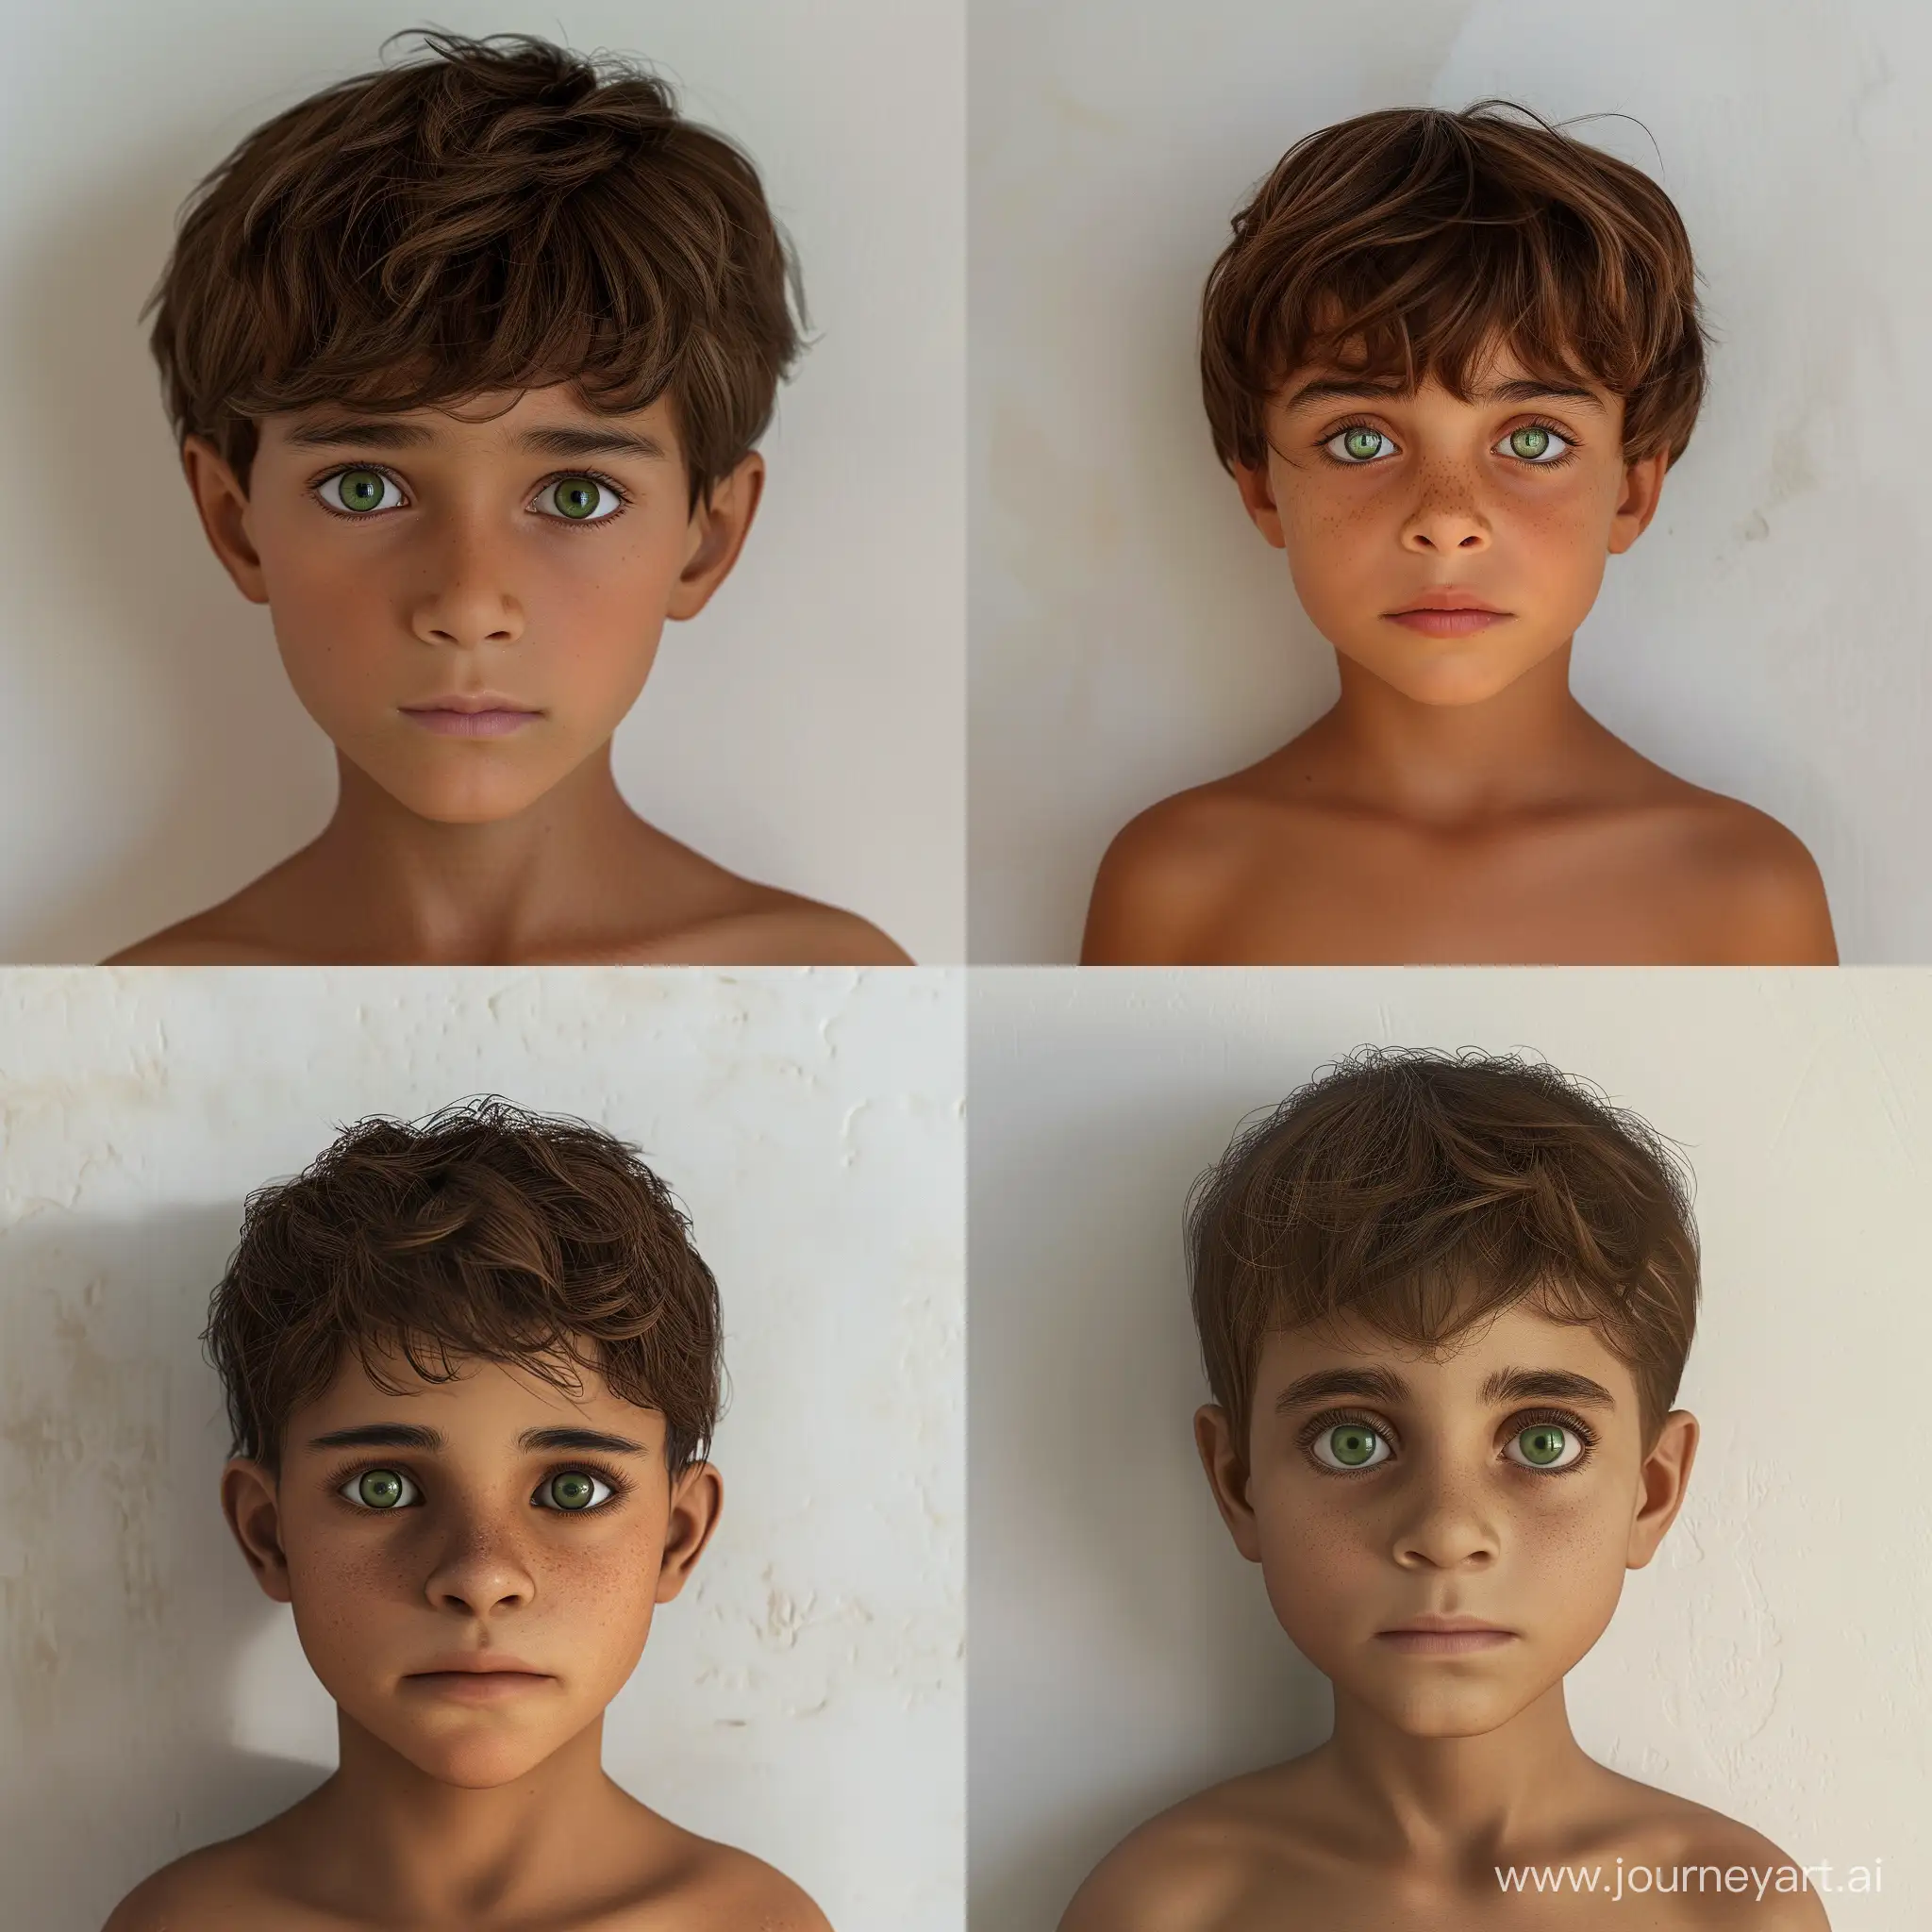 Charming-Egyptian-Child-Portrait-Adorable-8YearOld-with-Brown-Hair-and-Green-Eyes